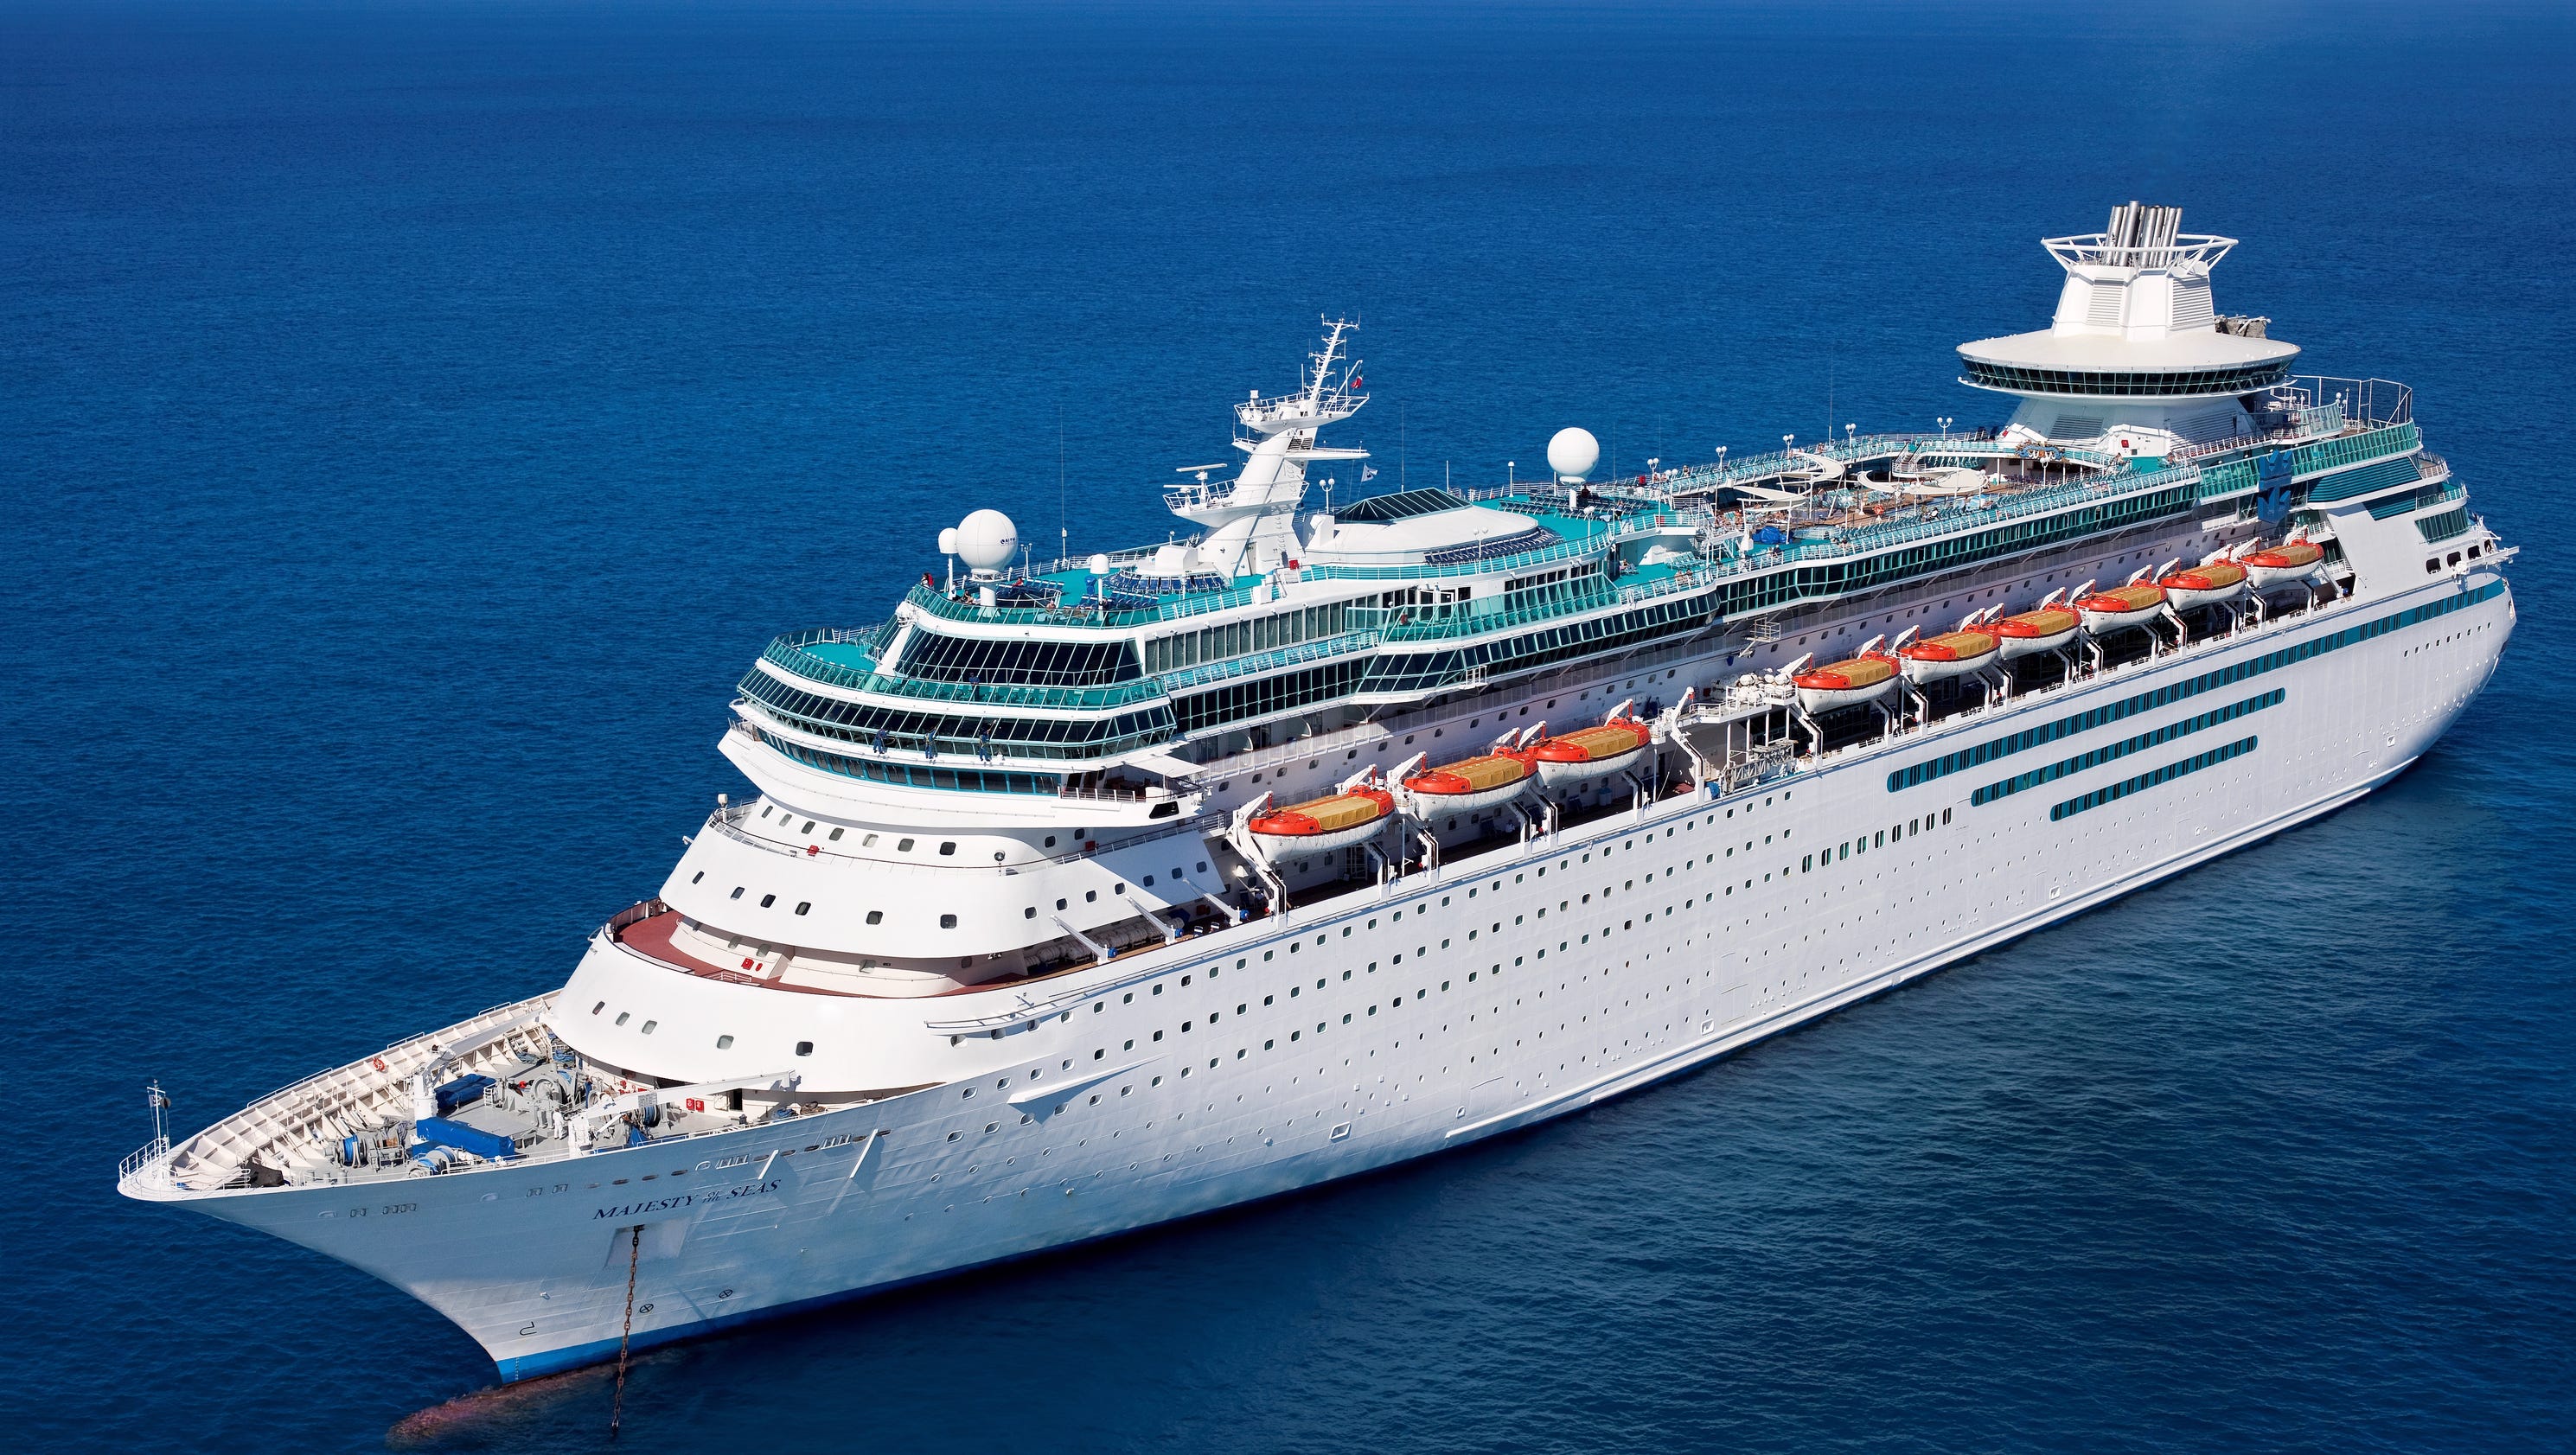 Royal Caribbean to say goodbye to Majesty of the Seas3200 x 1680